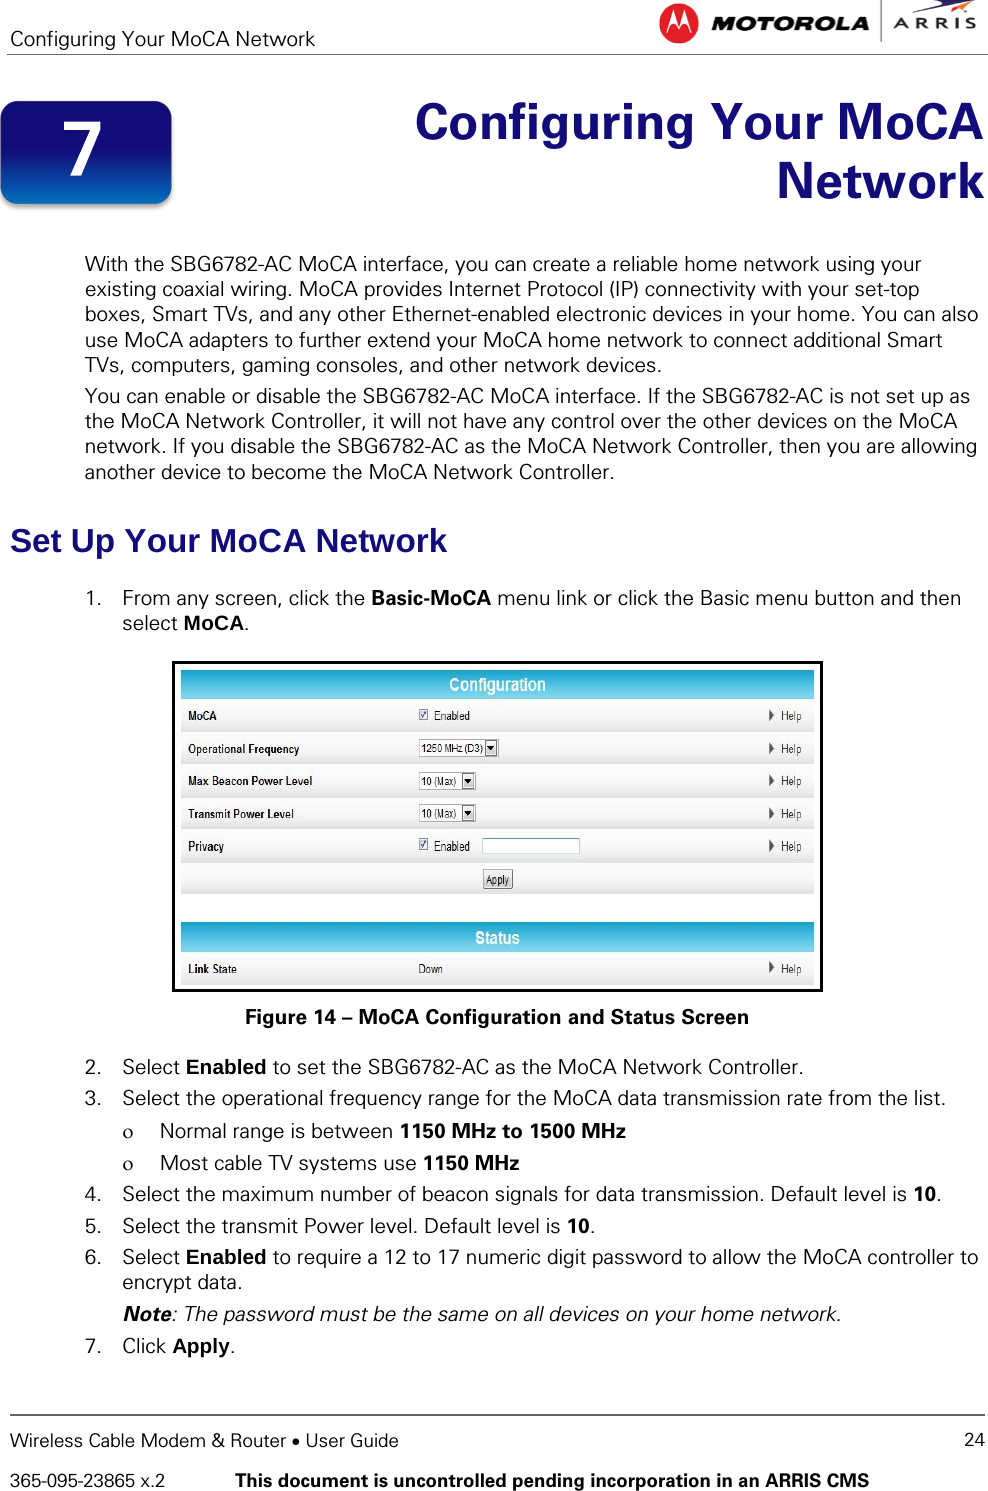 Configuring Your MoCA Network   Wireless Cable Modem &amp; Router • User Guide 24 365-095-23865 x.2   This document is uncontrolled pending incorporation in an ARRIS CMS   Configuring Your MoCA Network  With the SBG6782-AC MoCA interface, you can create a reliable home network using your existing coaxial wiring. MoCA provides Internet Protocol (IP) connectivity with your set-top boxes, Smart TVs, and any other Ethernet-enabled electronic devices in your home. You can also use MoCA adapters to further extend your MoCA home network to connect additional Smart TVs, computers, gaming consoles, and other network devices. You can enable or disable the SBG6782-AC MoCA interface. If the SBG6782-AC is not set up as the MoCA Network Controller, it will not have any control over the other devices on the MoCA network. If you disable the SBG6782-AC as the MoCA Network Controller, then you are allowing another device to become the MoCA Network Controller. Set Up Your MoCA Network 1. From any screen, click the Basic-MoCA menu link or click the Basic menu button and then select MoCA.  Figure 14 – MoCA Configuration and Status Screen 2. Select Enabled to set the SBG6782-AC as the MoCA Network Controller. 3. Select the operational frequency range for the MoCA data transmission rate from the list. ο Normal range is between 1150 MHz to 1500 MHz ο Most cable TV systems use 1150 MHz 4. Select the maximum number of beacon signals for data transmission. Default level is 10. 5. Select the transmit Power level. Default level is 10. 6. Select Enabled to require a 12 to 17 numeric digit password to allow the MoCA controller to encrypt data.  Note: The password must be the same on all devices on your home network. 7. Click Apply. 7 